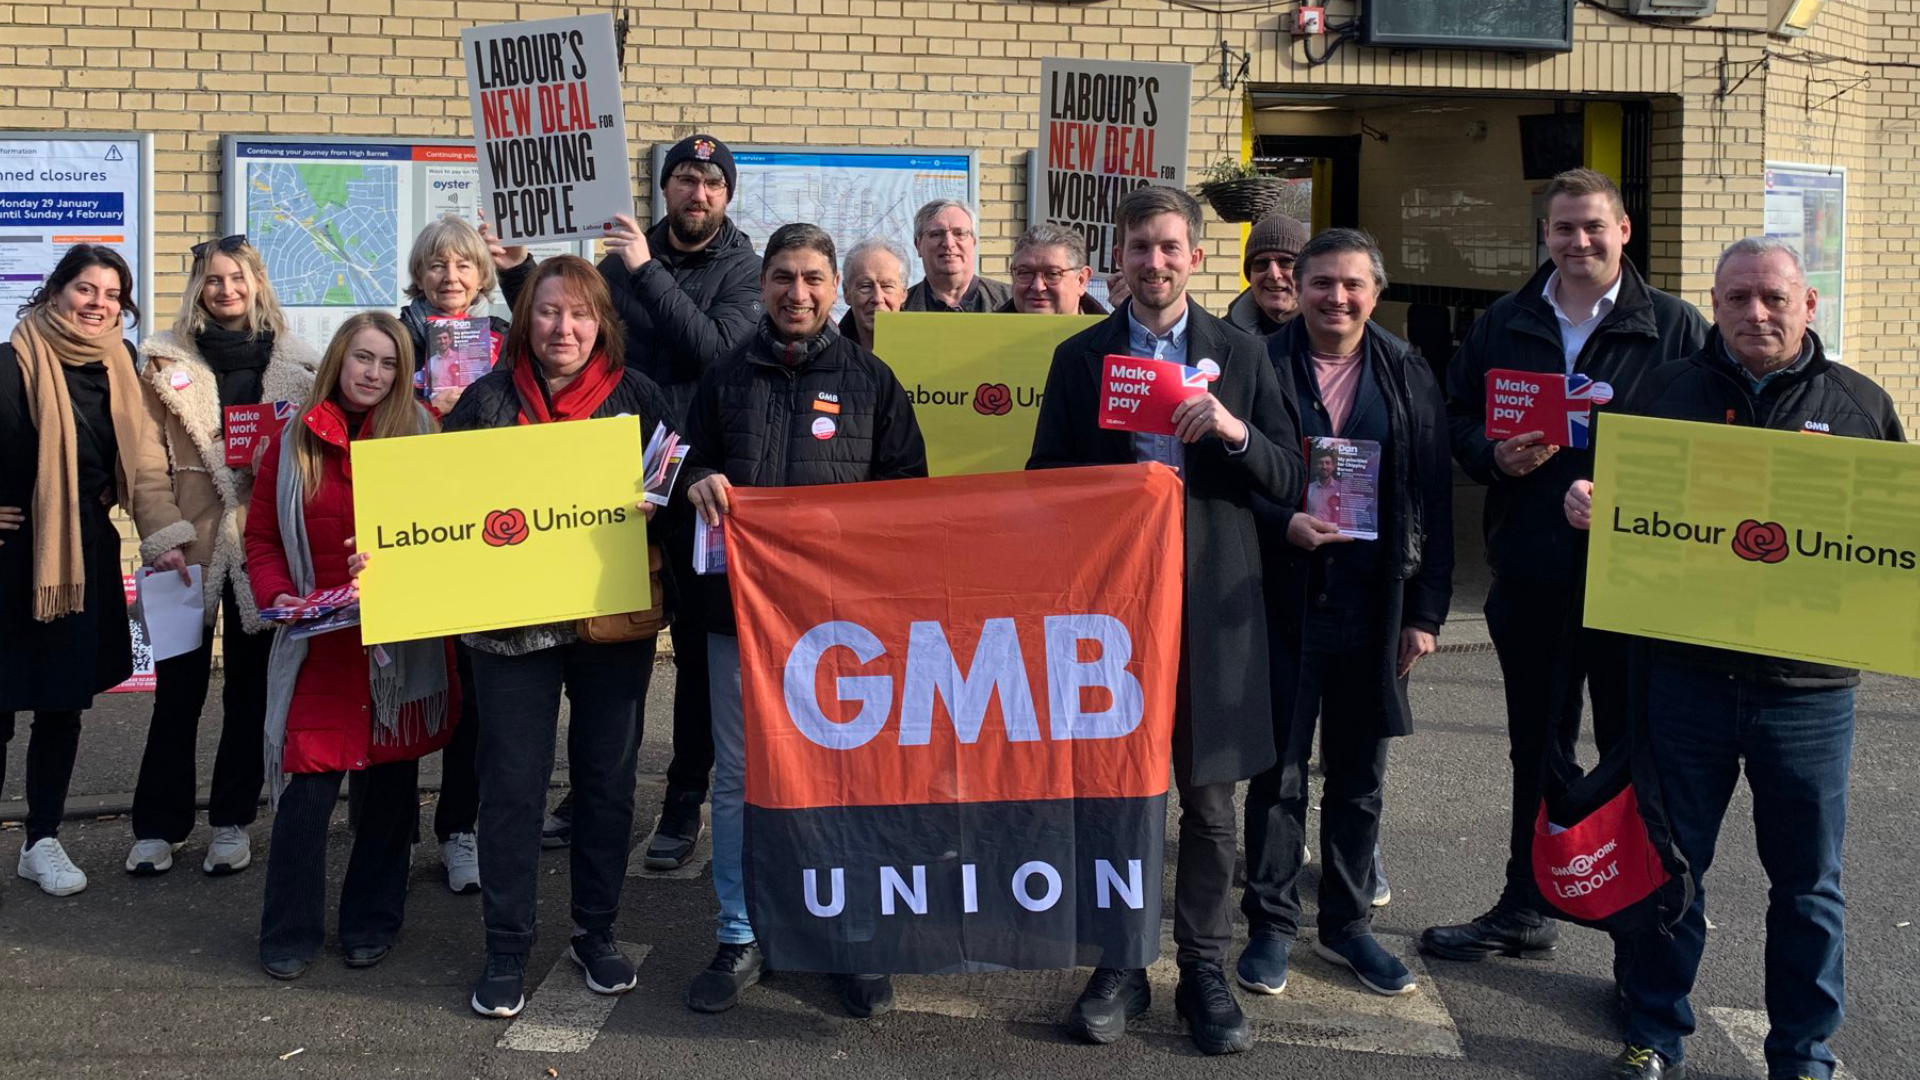 GMB London campaigning for the New Deal for Working People